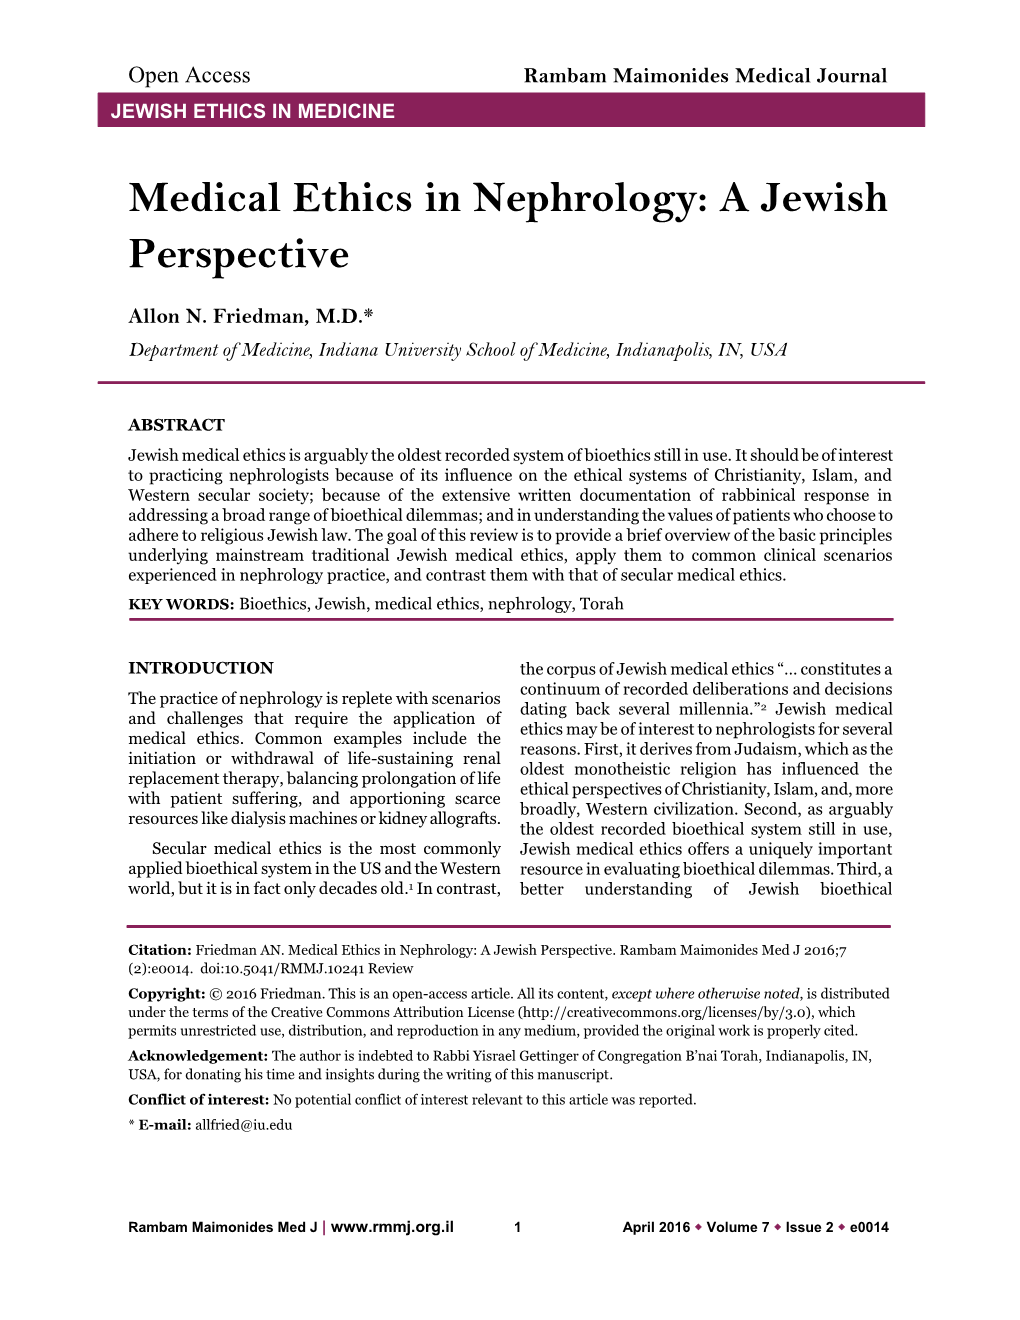 Medical Ethics in Nephrology: a Jewish Perspective